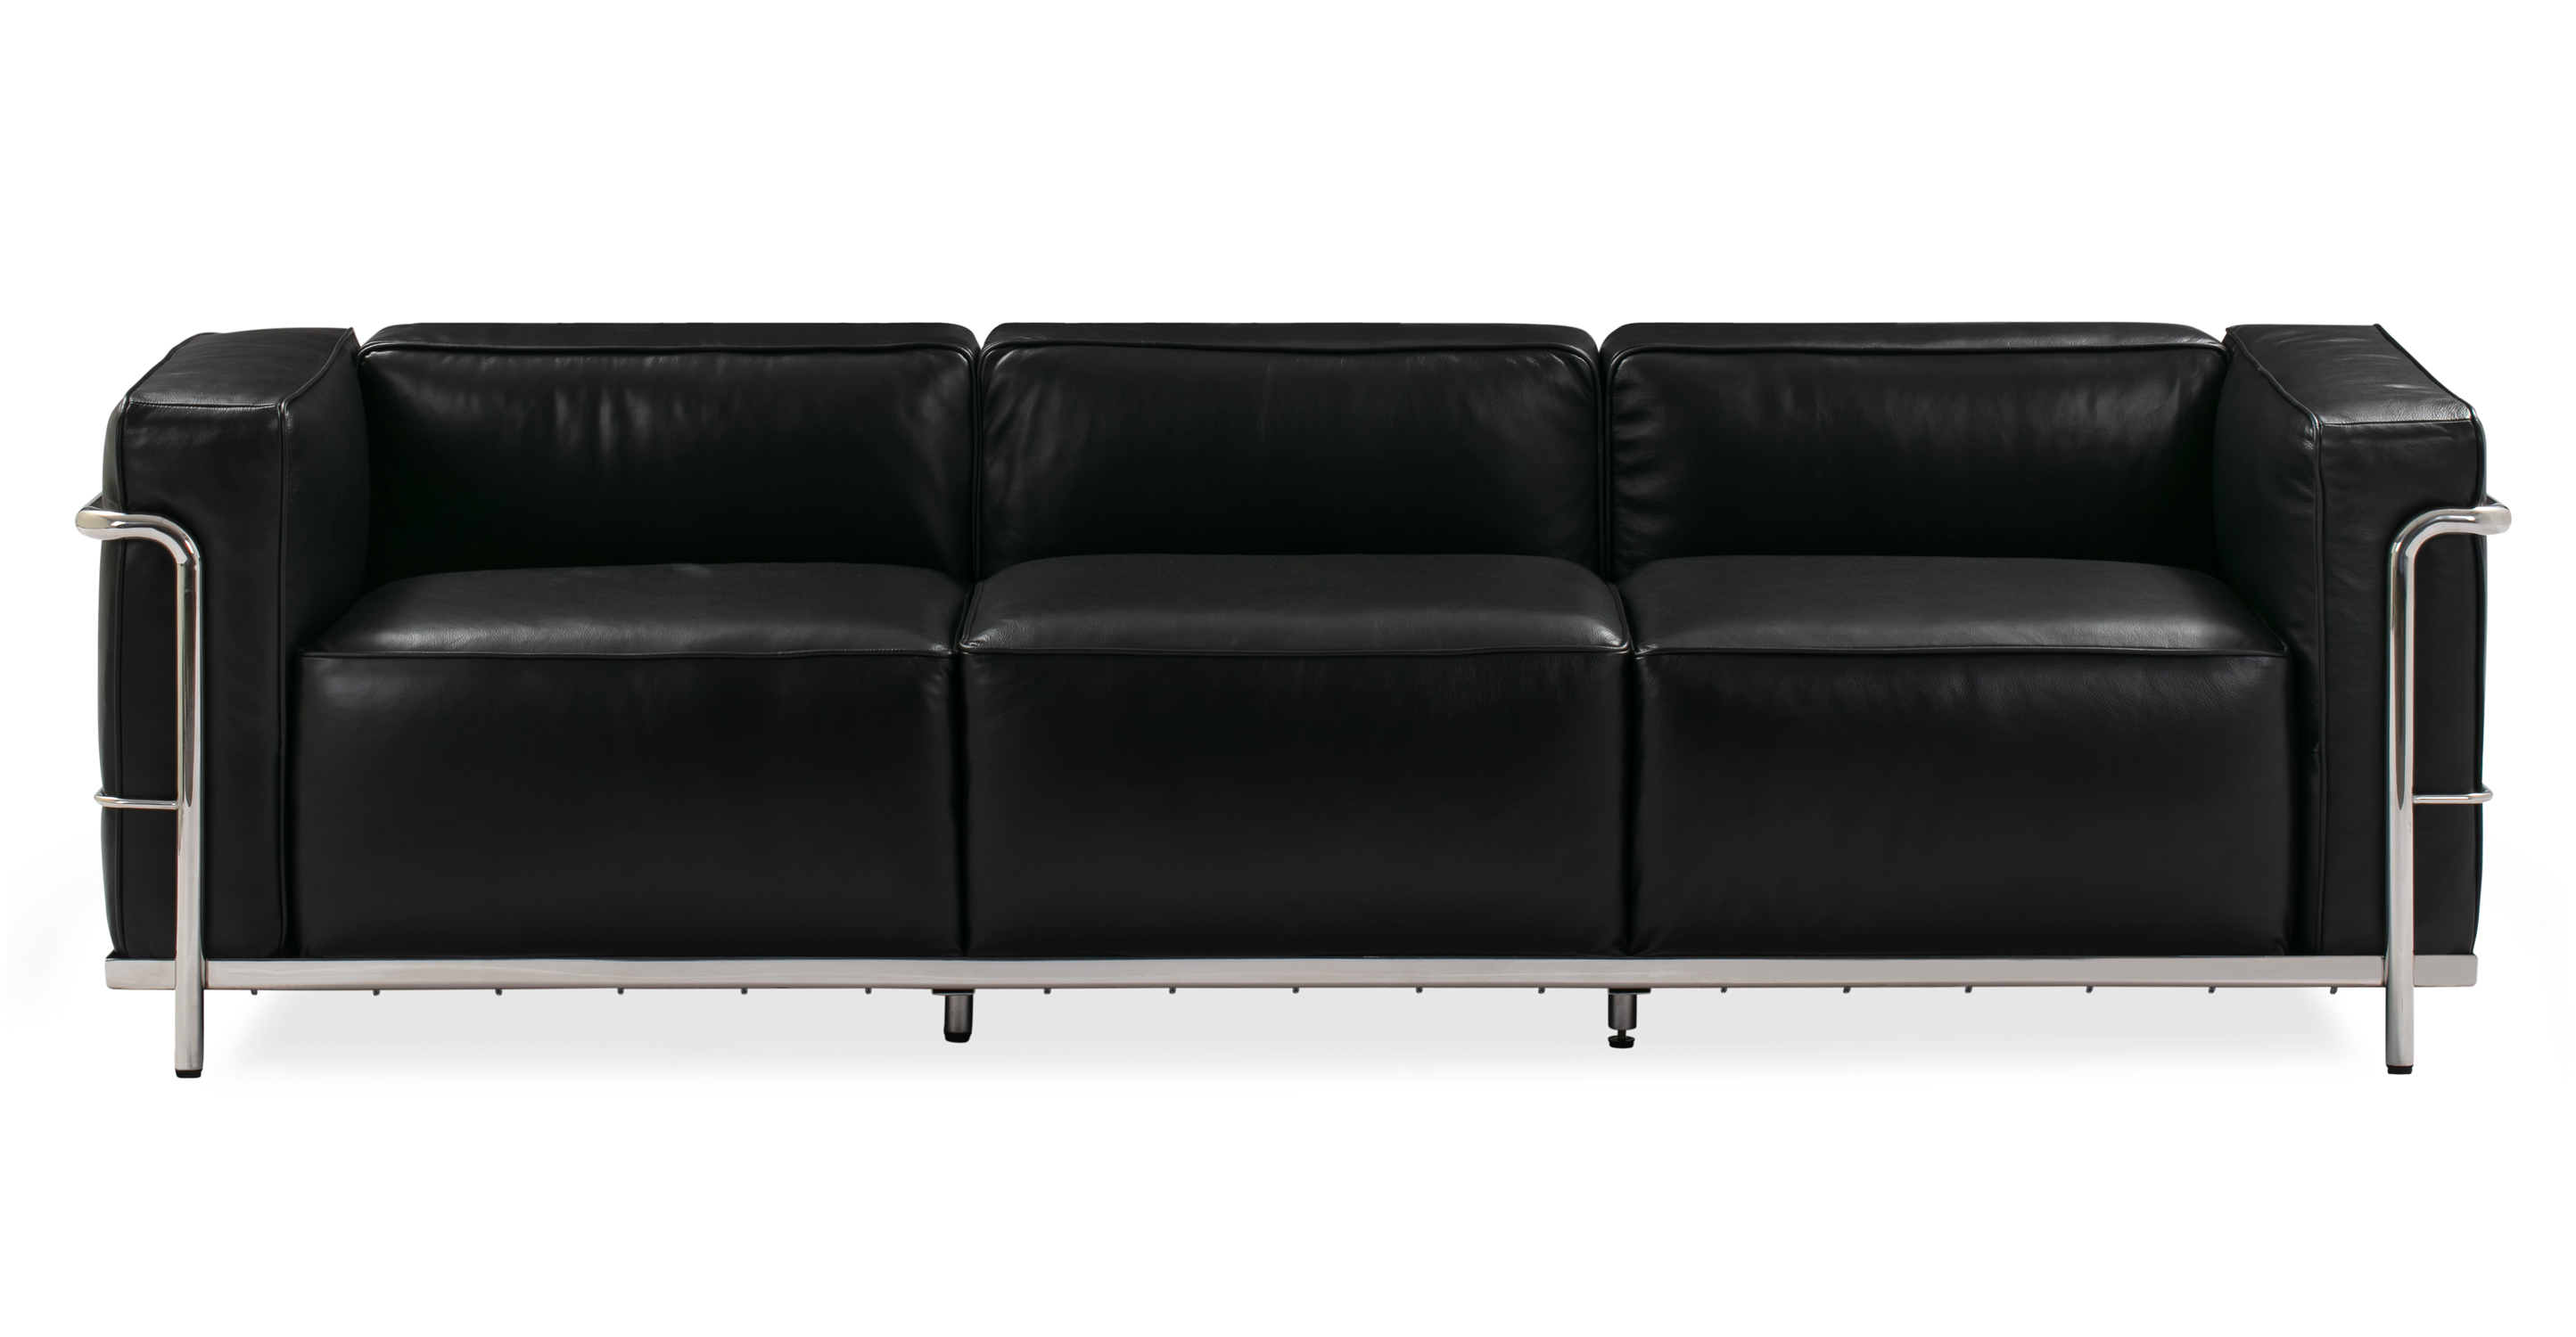 Roche iconic sofa, three large single seat cushions. Three back cushions and two arm cushions. Exposed silver frame.